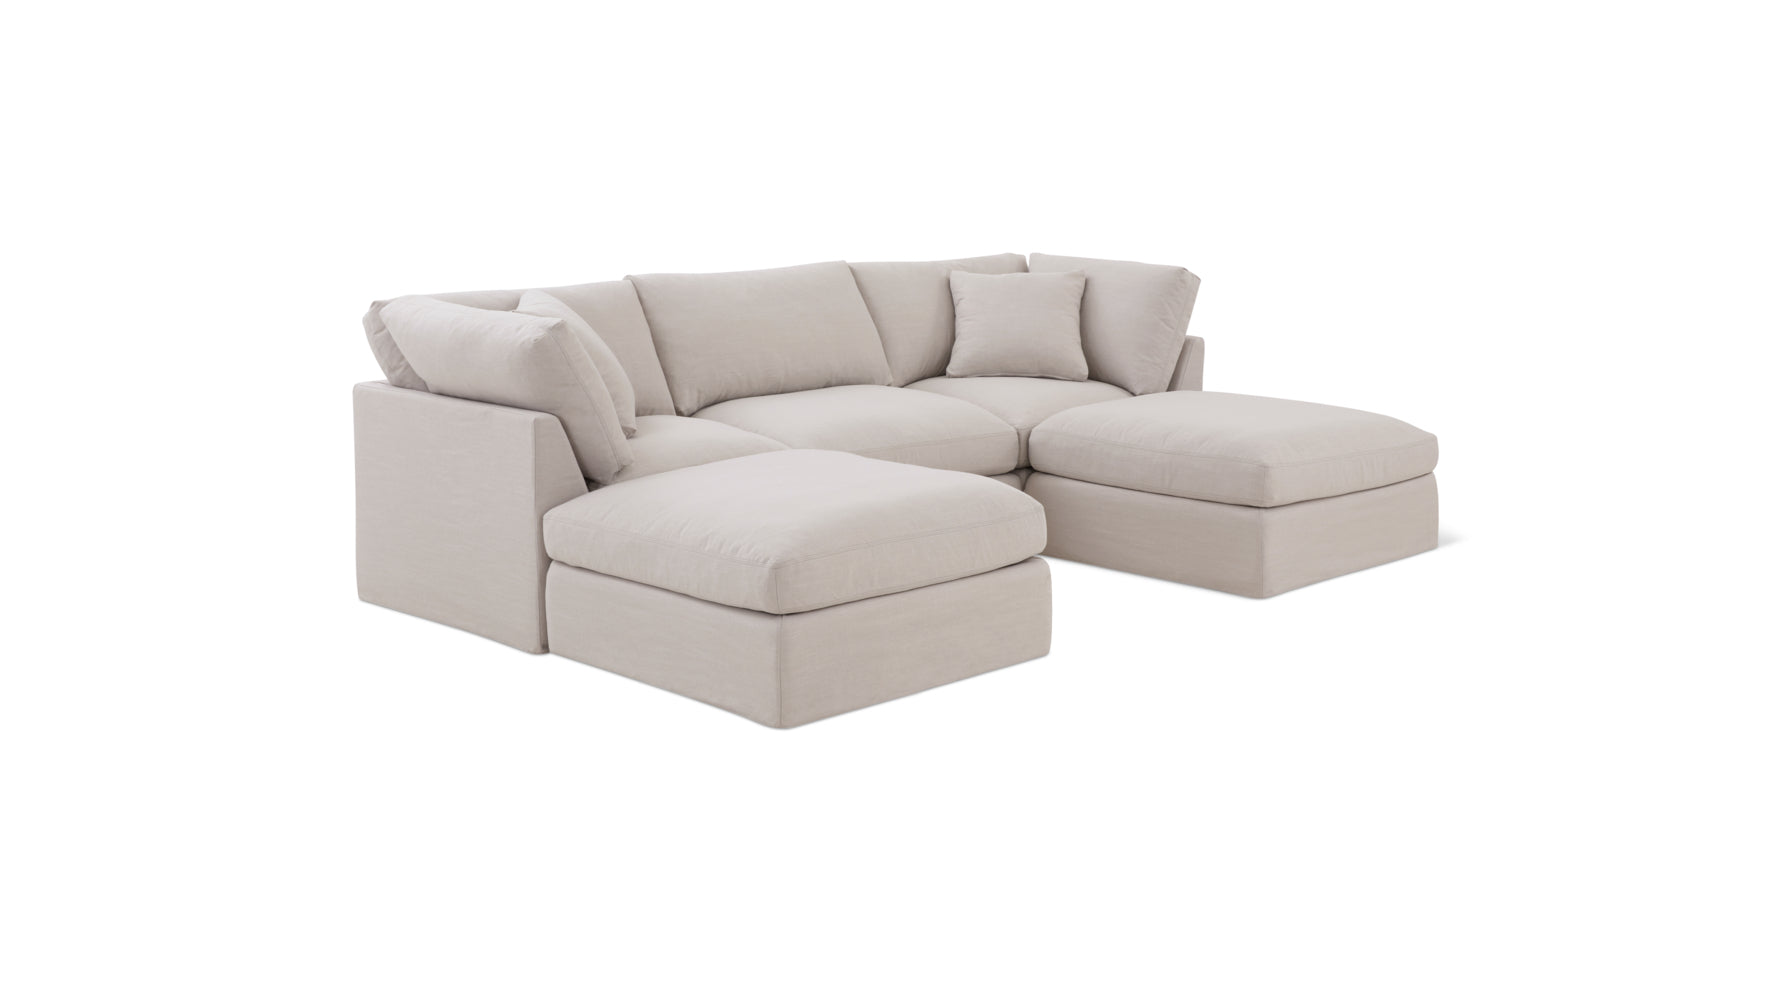 Get Together™ 5-Piece Modular U-Shaped Sectional, Standard, Clay - Image 2